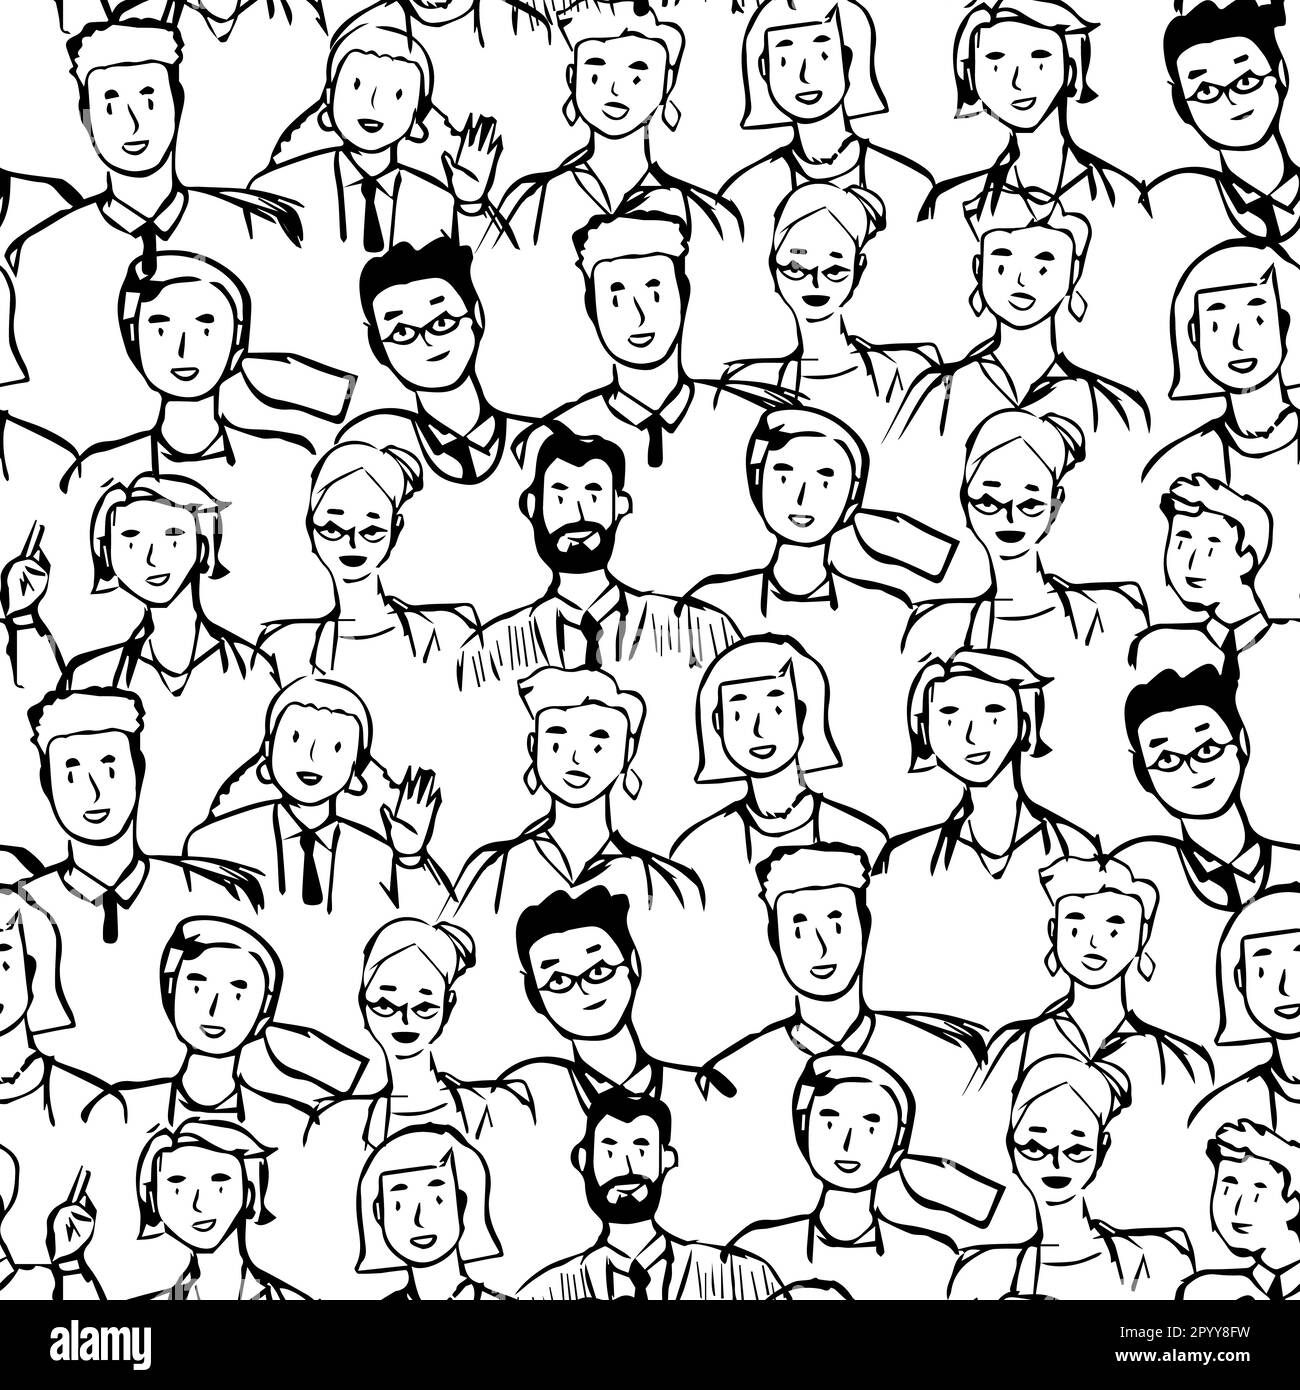 Diverse people in hand draw seamless pattern illustration. diverse group of men and women drawn with black lines on isolated background in doodle styl Stock Vector